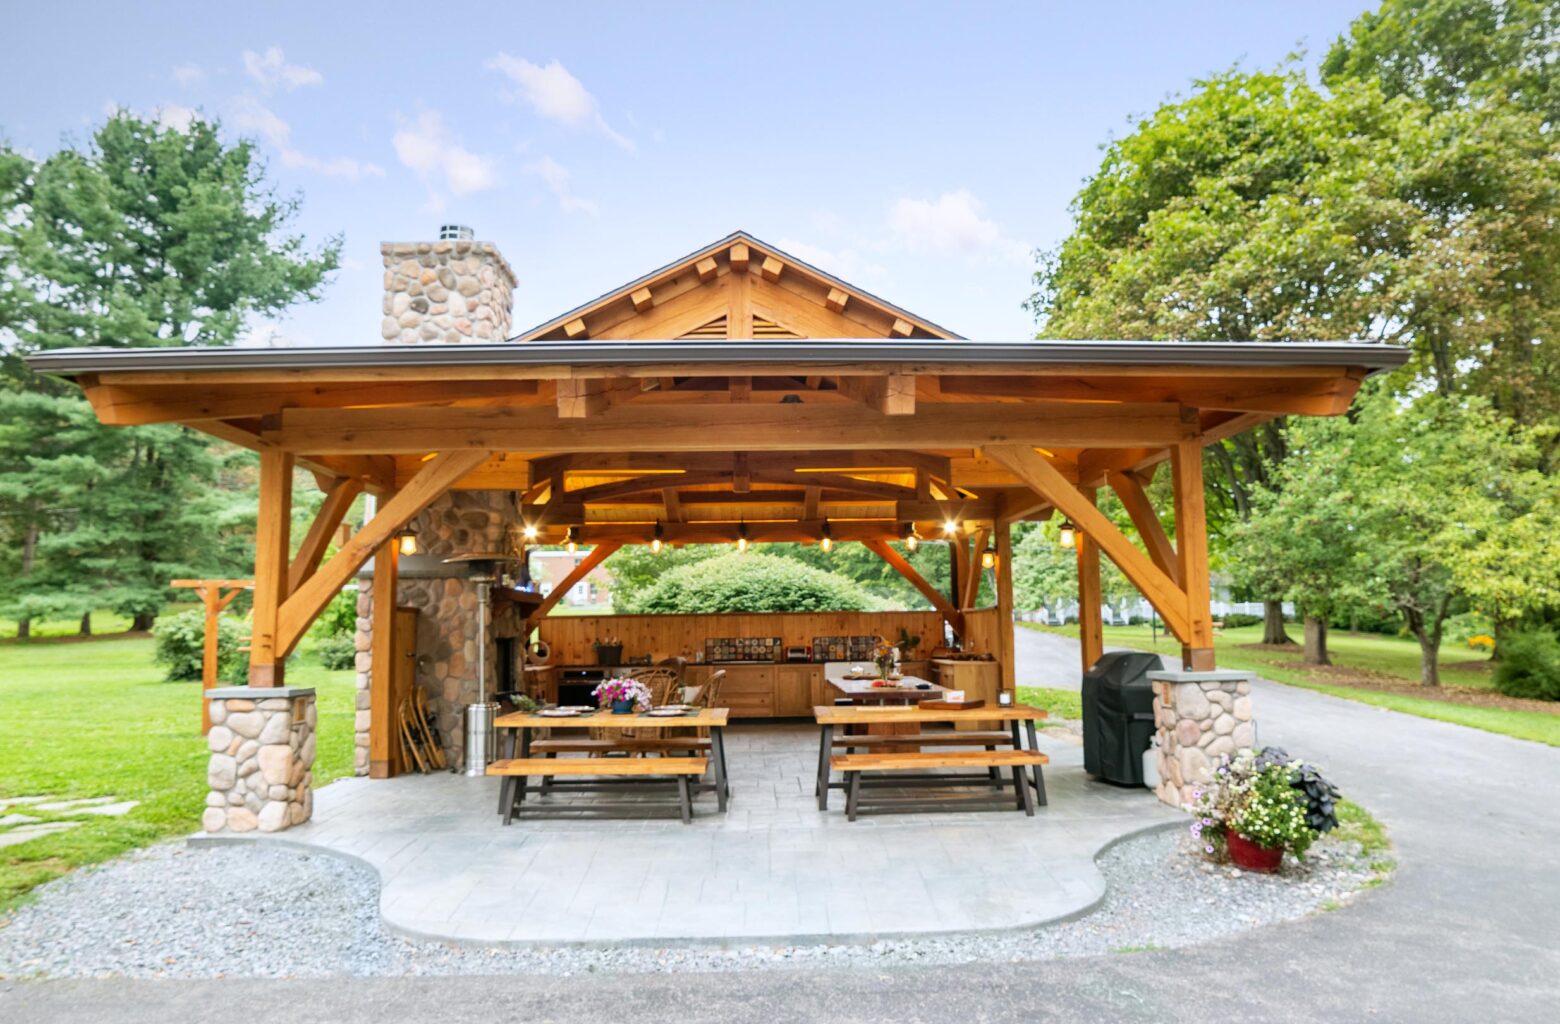 Outdoor Kitchen With Stove: Excellent Oven and Stovetop Options Plus 4  Inspiring Ideas